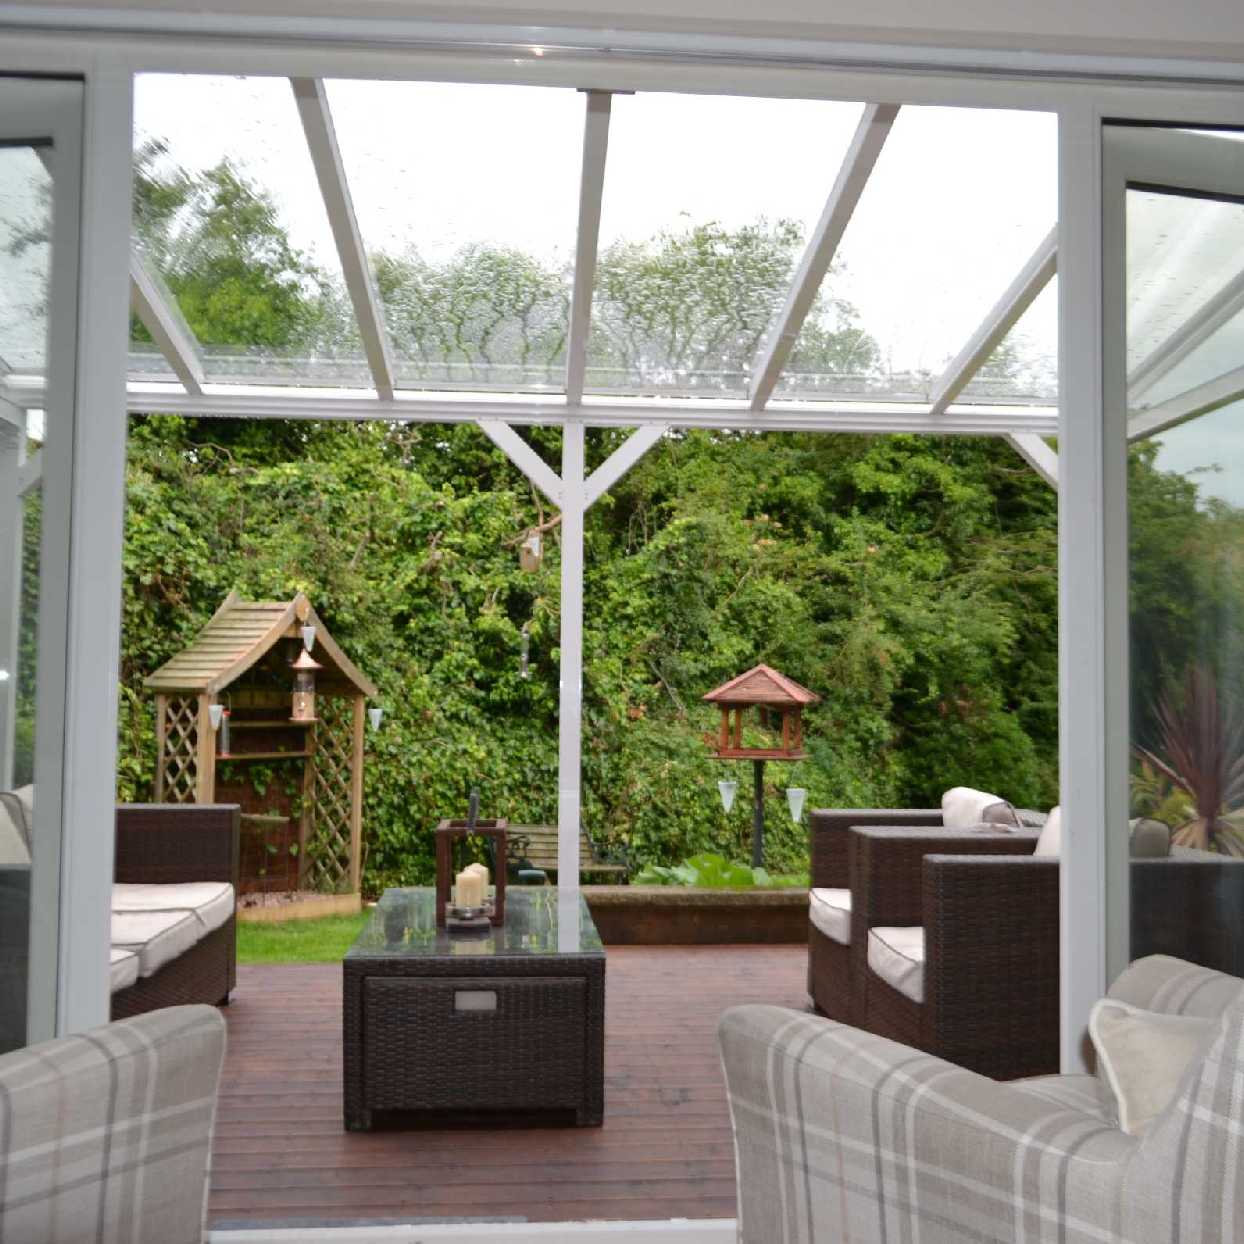 Great selection of Omega Smart Lean-To Canopy, White UNGLAZED for 6mm Glazing - 2.1m (W) x 1.5m (P), (2) Supporting Posts